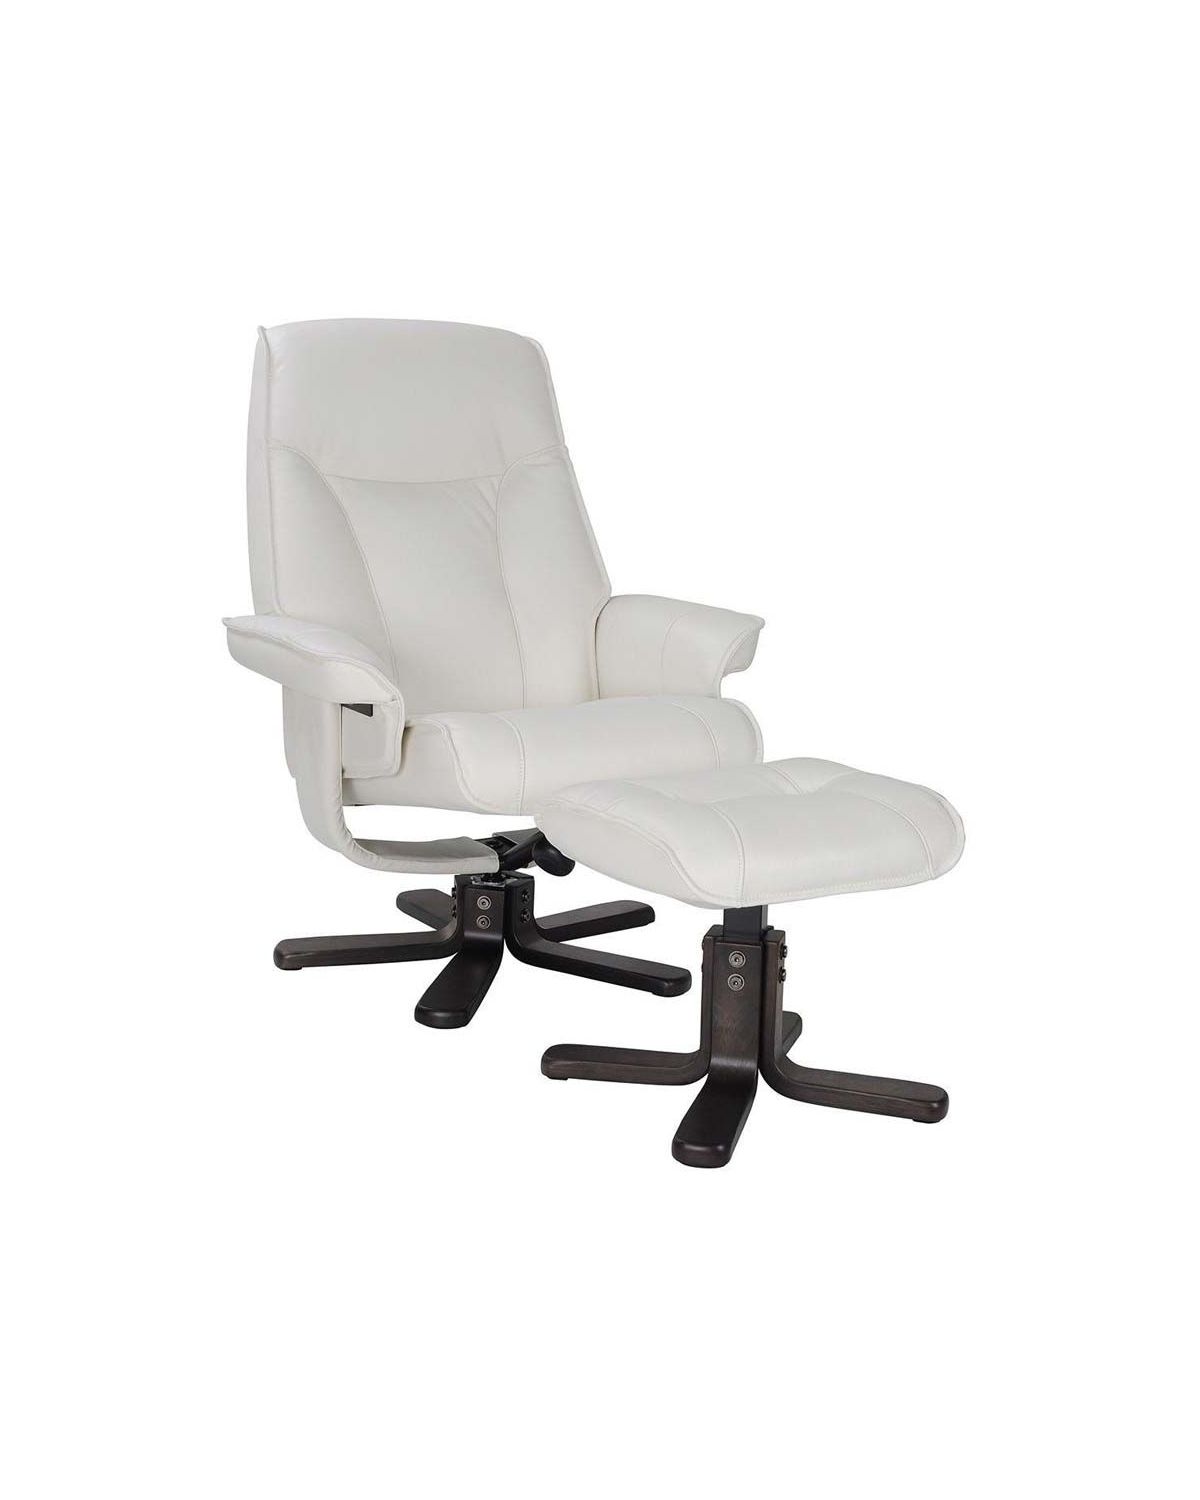 Fauteuil relax Easy Swing 7242 - Taille M - Manuel - Socle rond